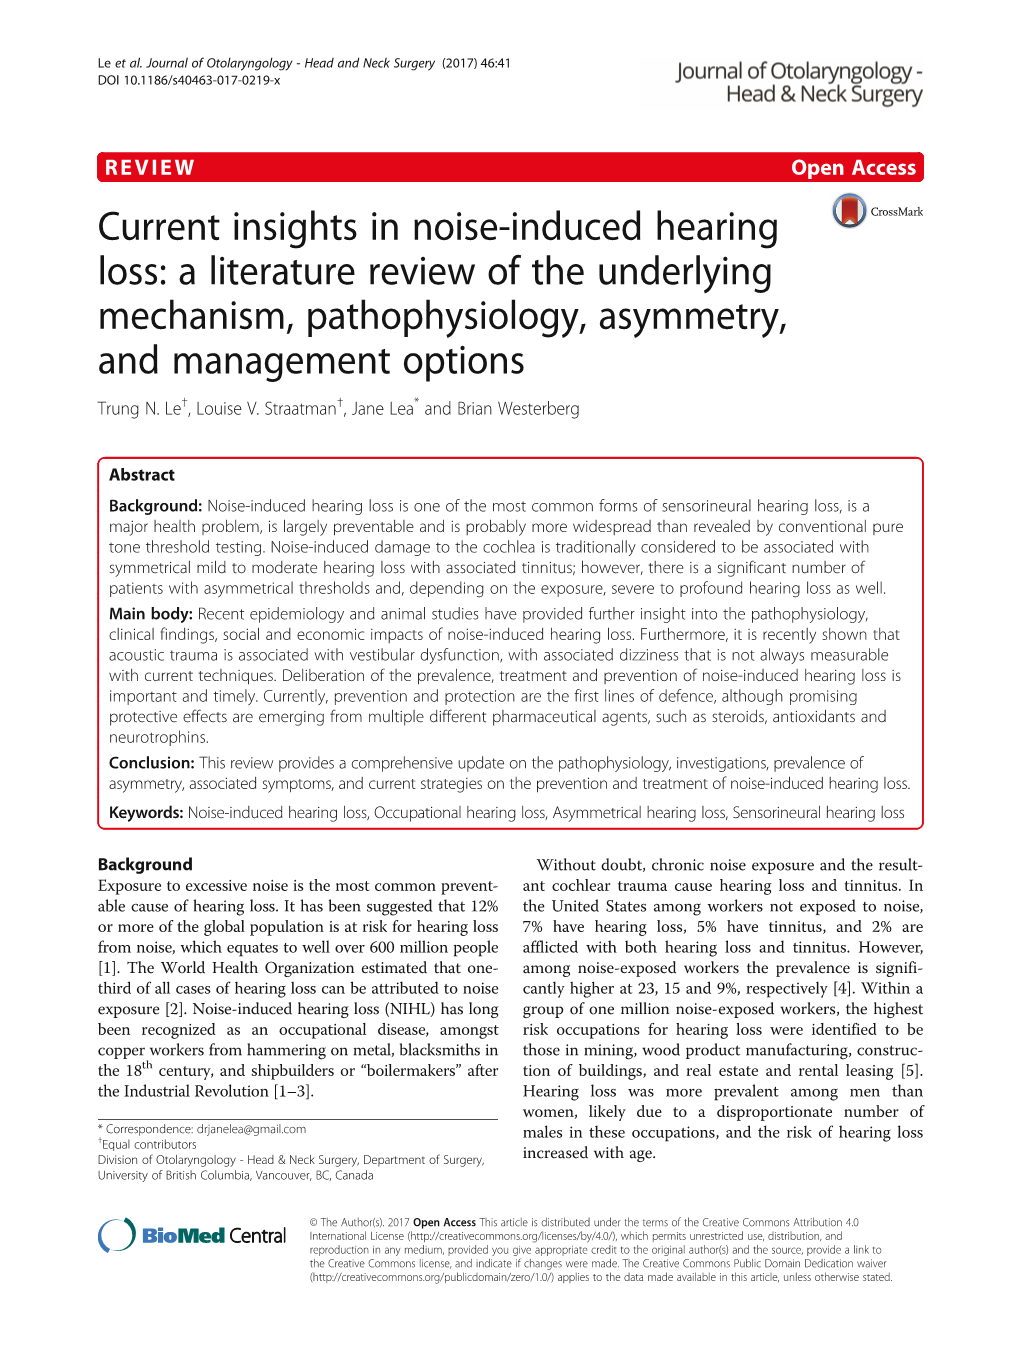 Current Insights in Noise-Induced Hearing Loss: a Literature Review of the Underlying Mechanism, Pathophysiology, Asymmetry, and Management Options Trung N